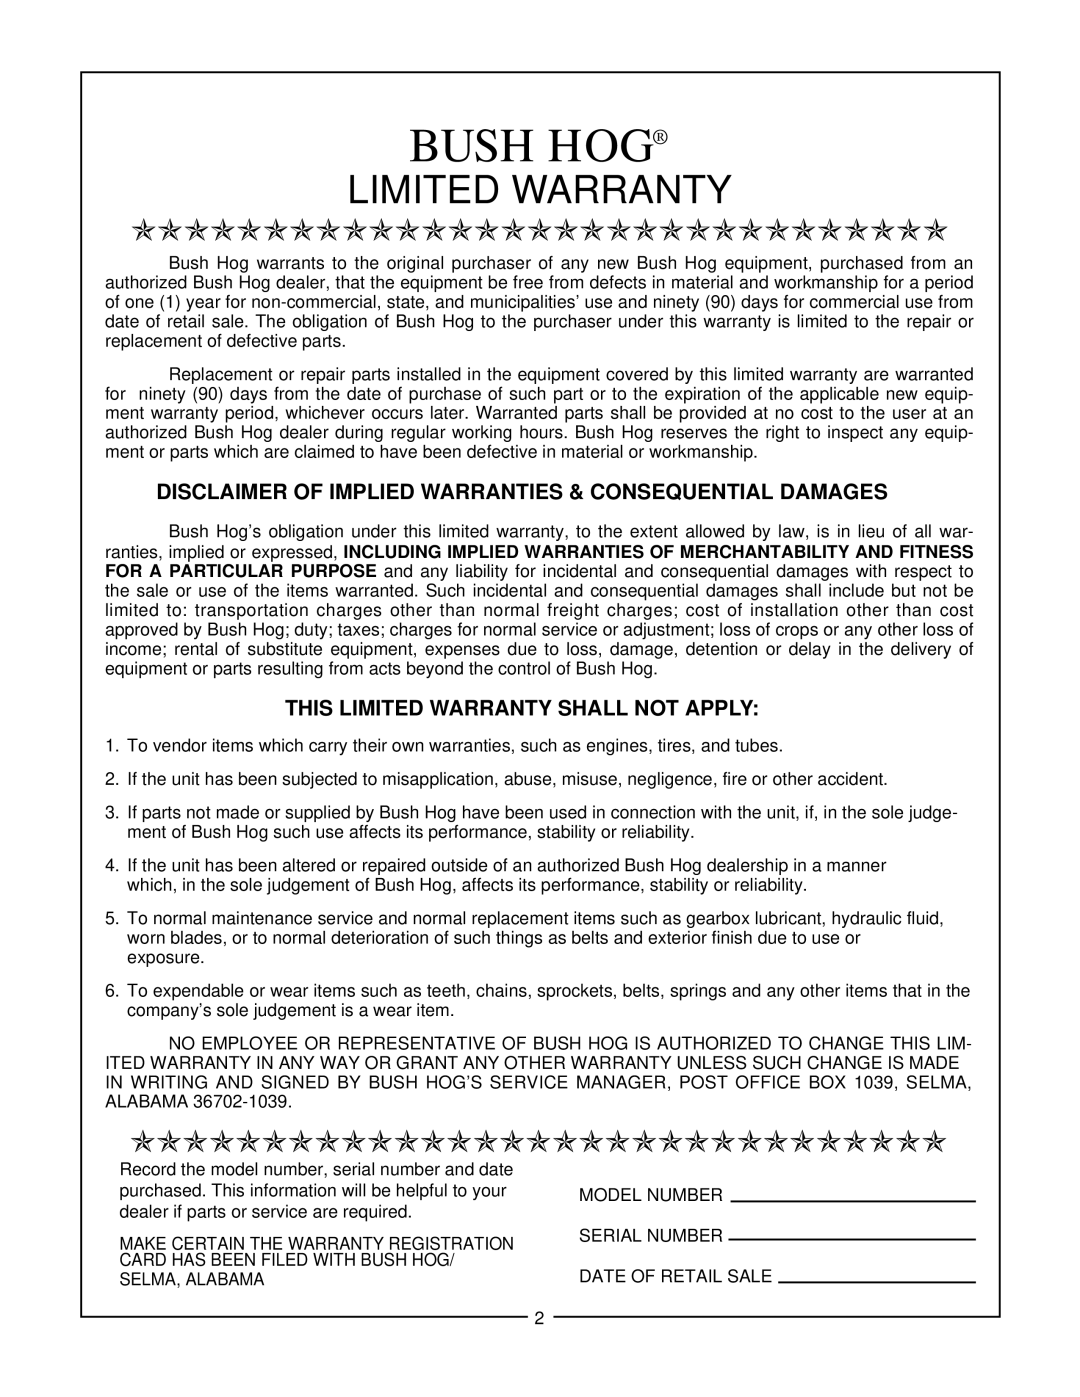 Bush Hog GT 48 Disclaimer Of Implied Warranties & Consequential Damages, This Limited Warranty Shall Not Apply, Bush Hog 